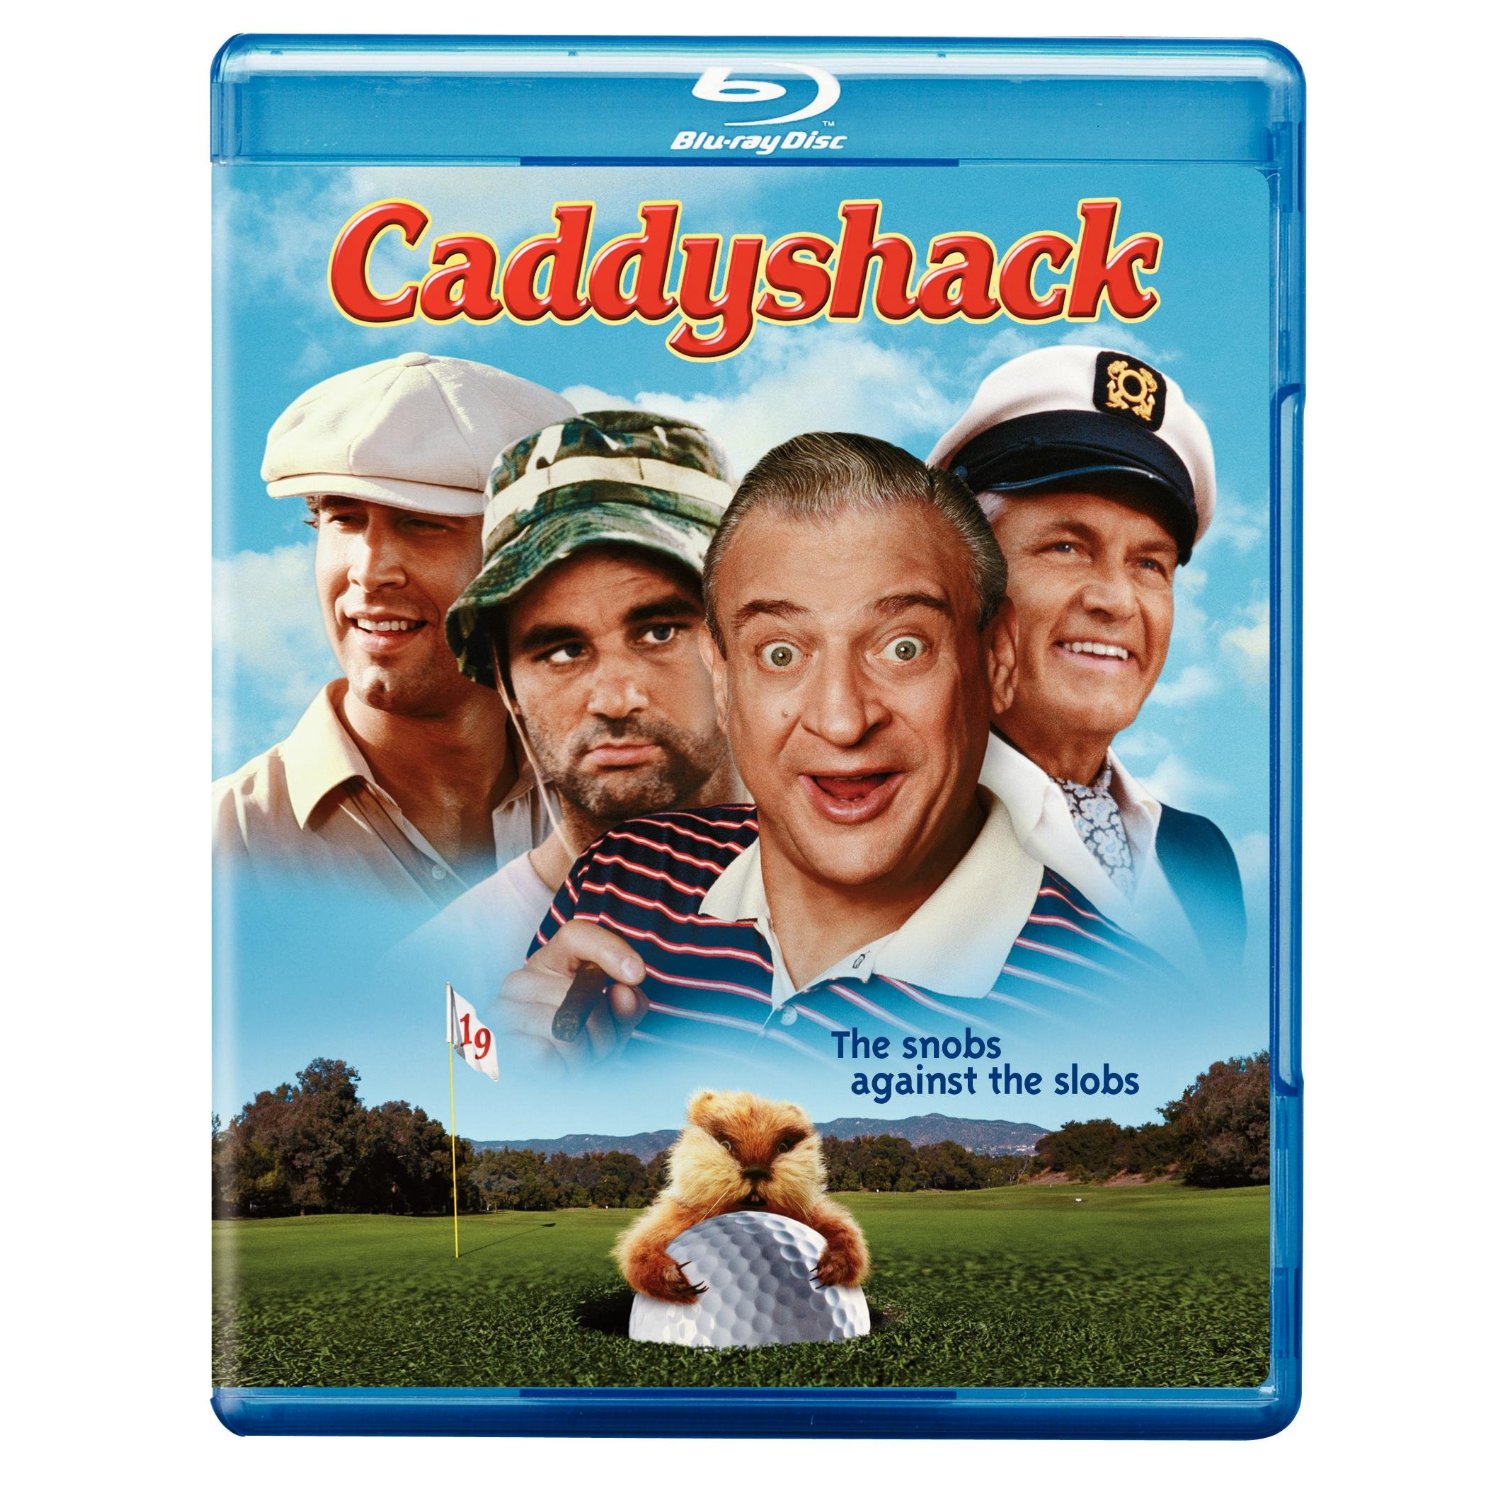 Famous Quotes From Caddyshack.